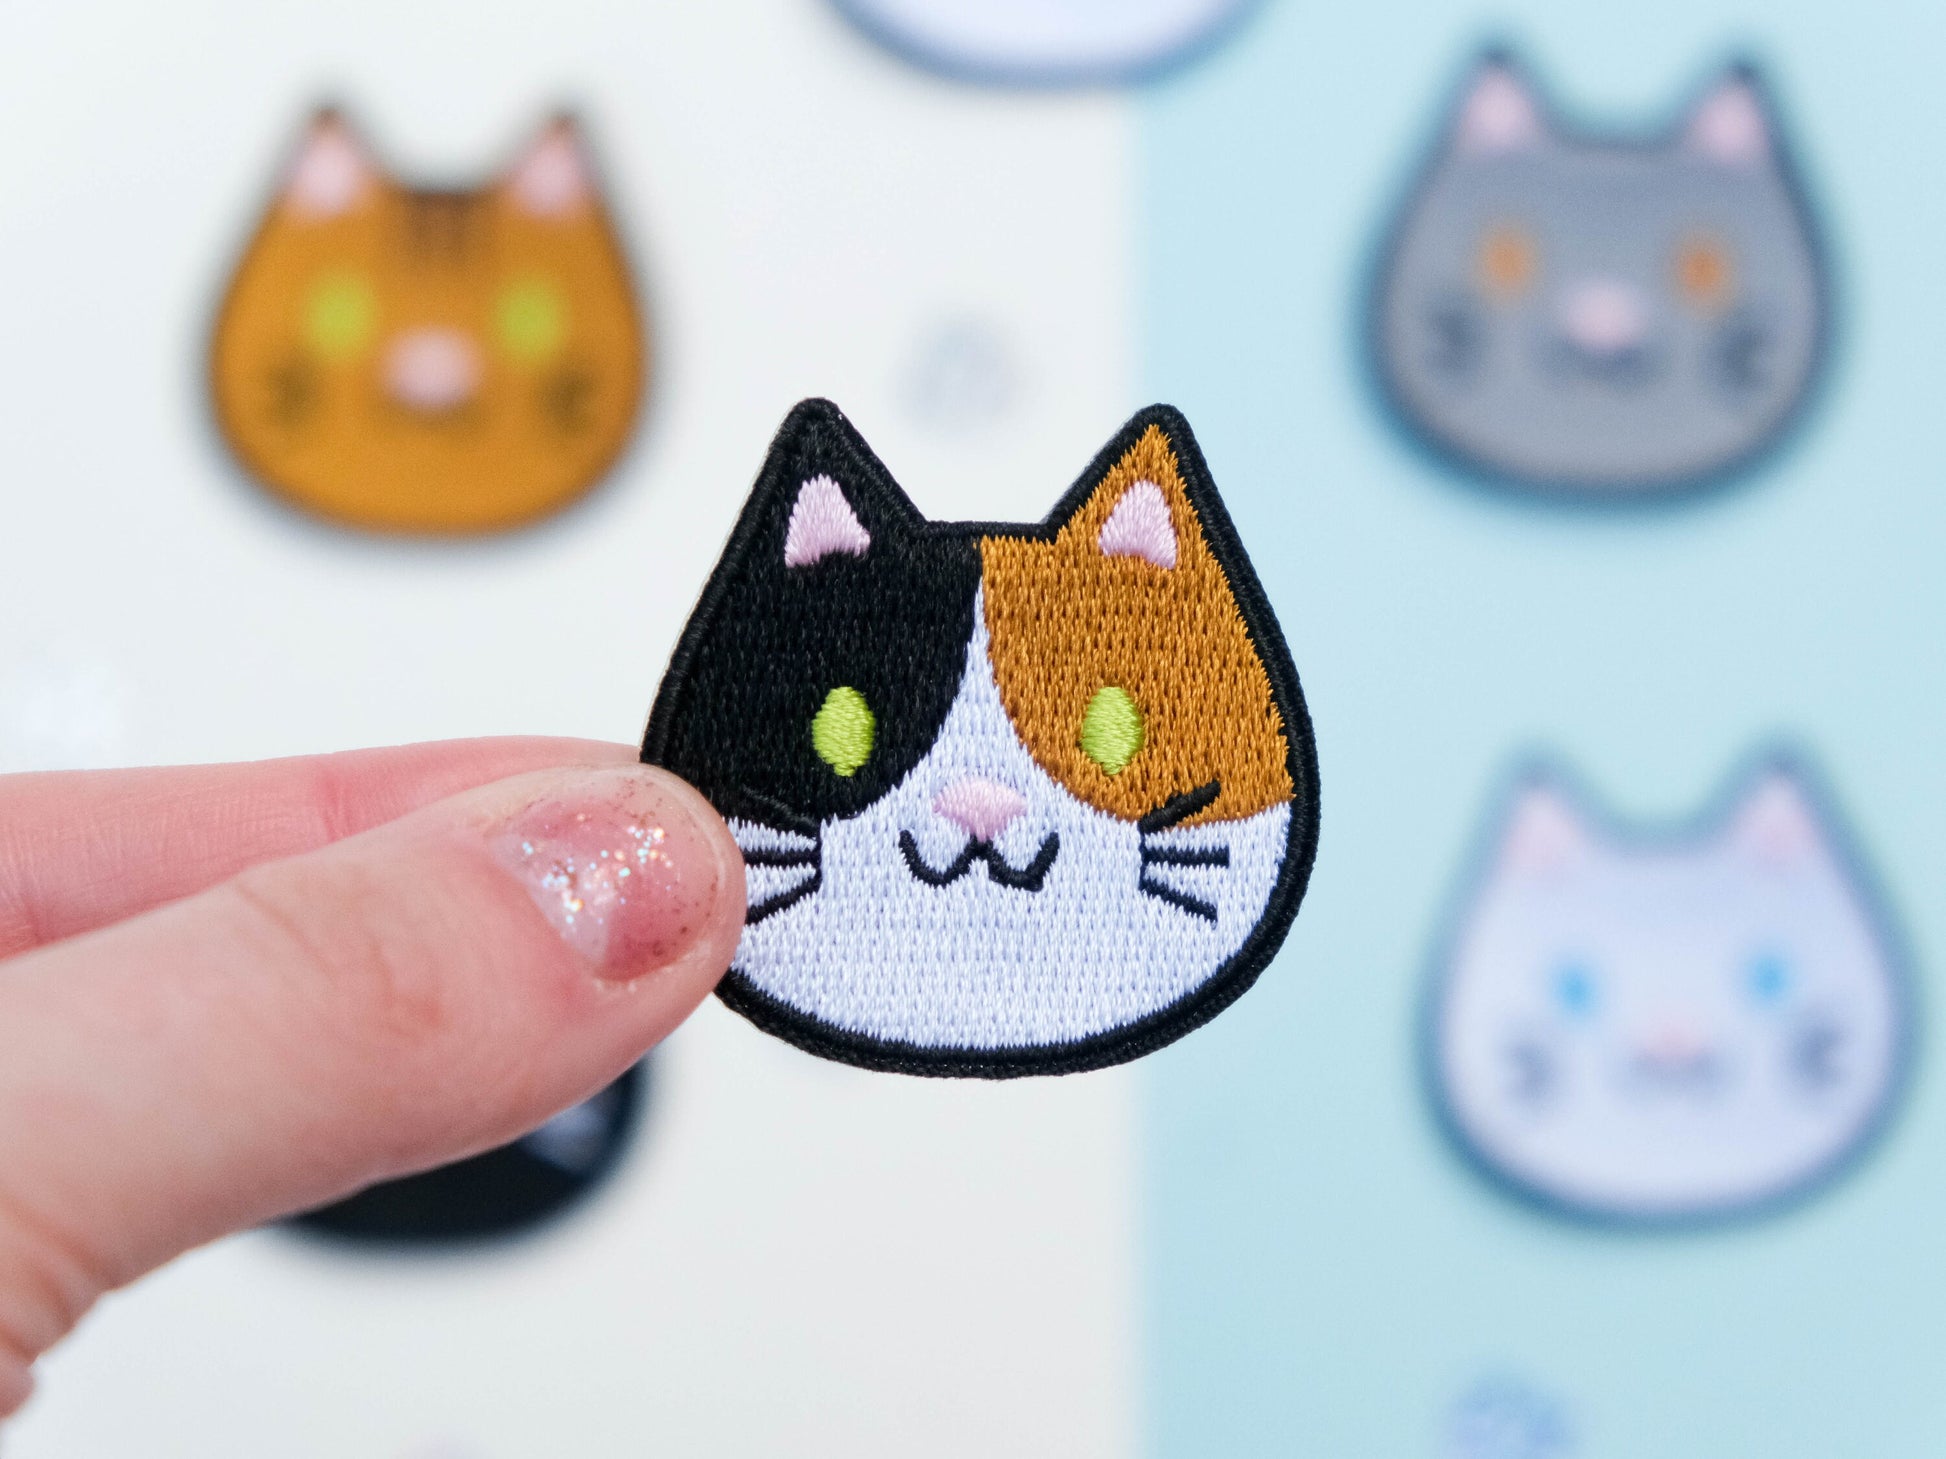 Cat Patch 12 Options Small Cat Patches Iron on Cute Iron on Cat Badge  Tuxedo Ginger Kids Christmas Gift From the Cat Stocking Stuffer 